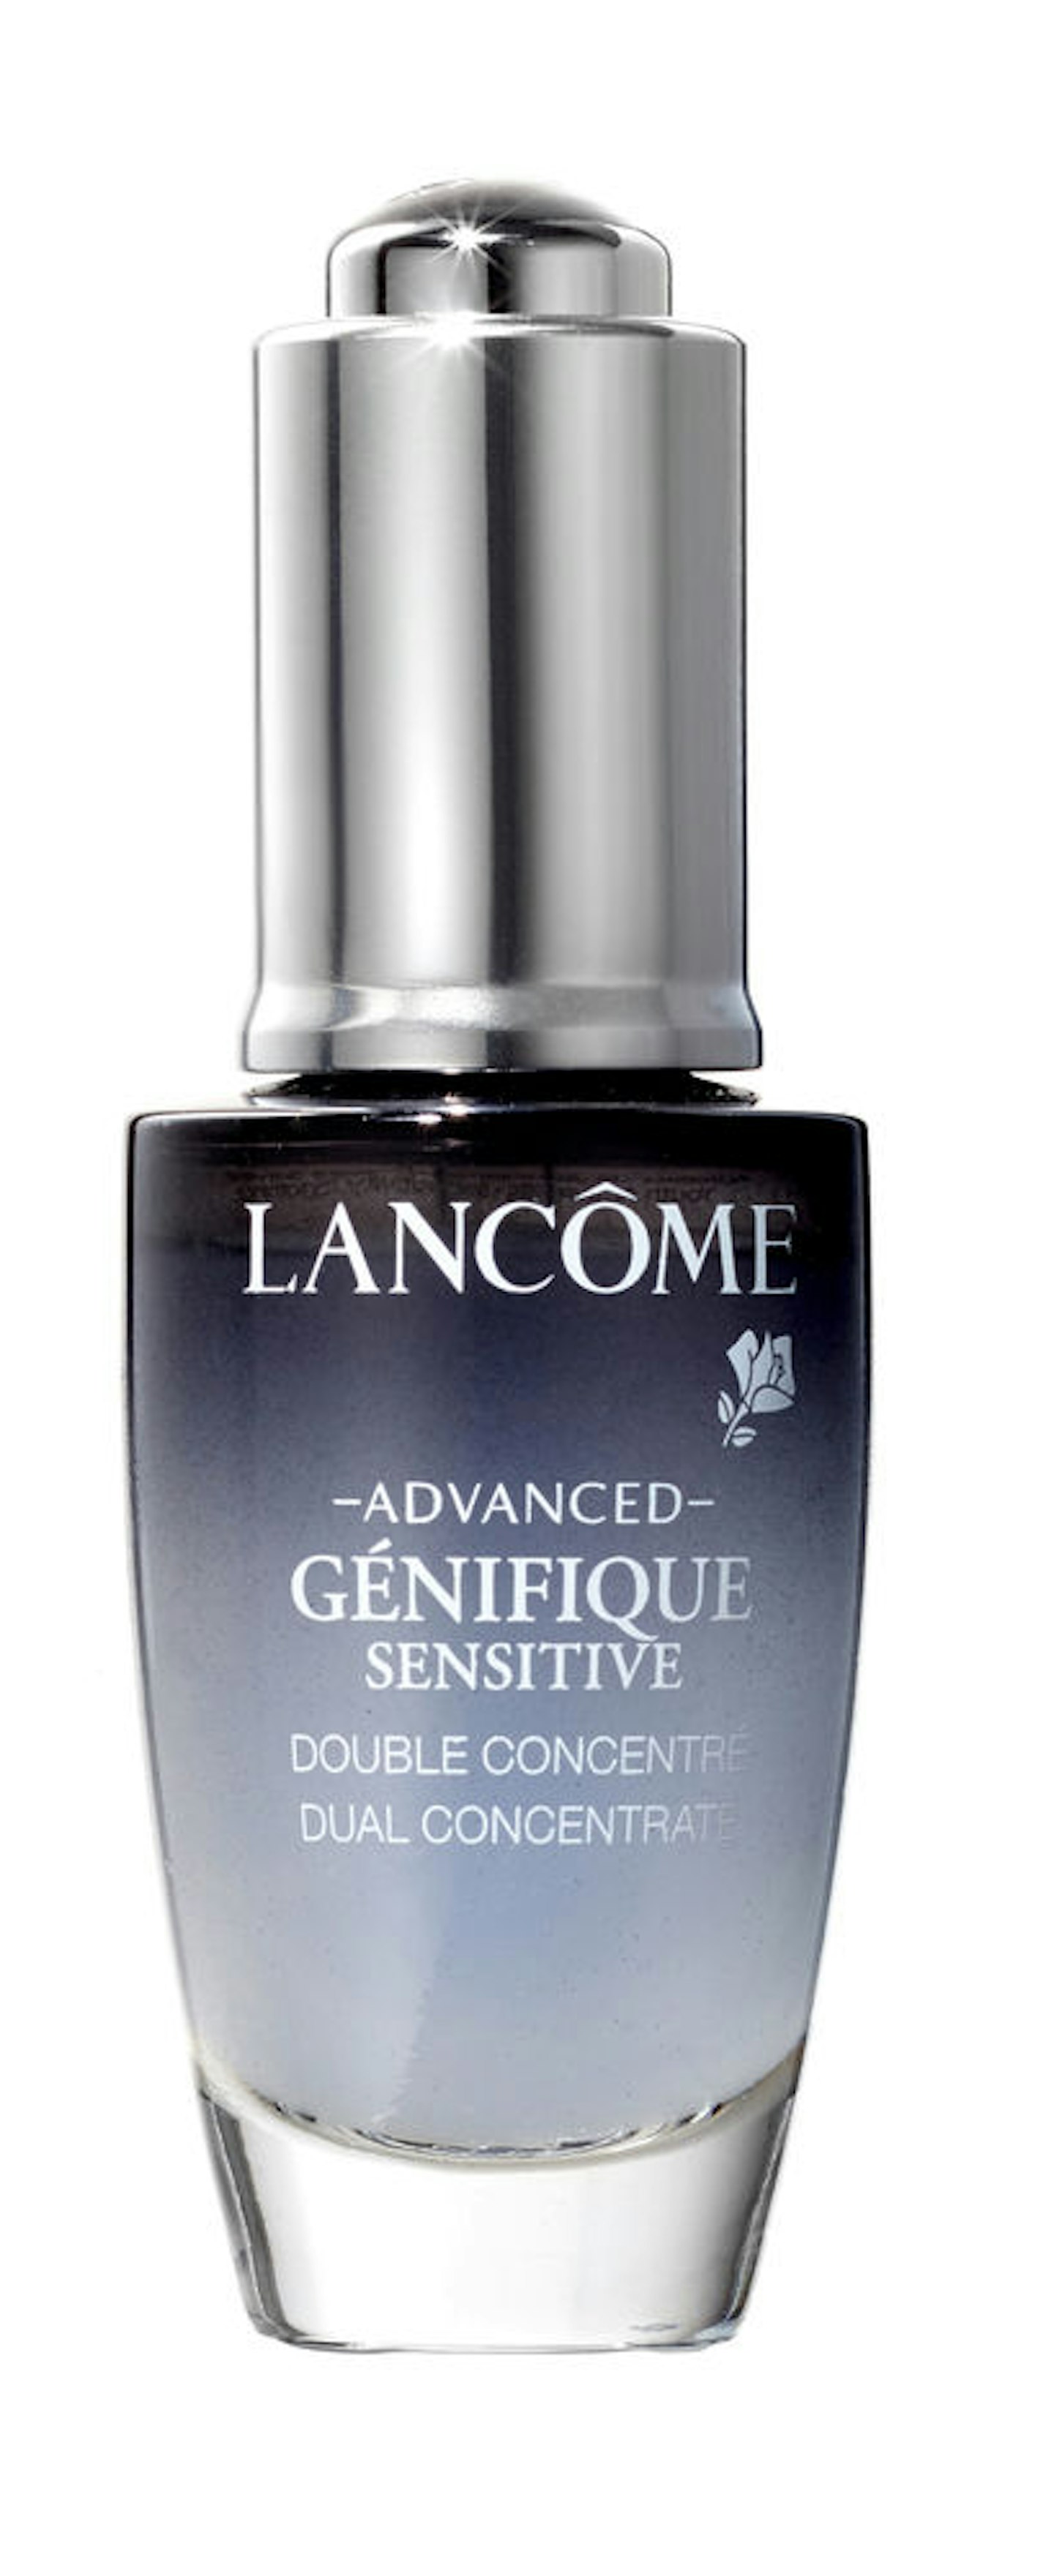 Ultimate Skincare Staple: Lancou0302me advance geu0301nifique sensitive youth activating + sensitive soothing dual concentrate, £59